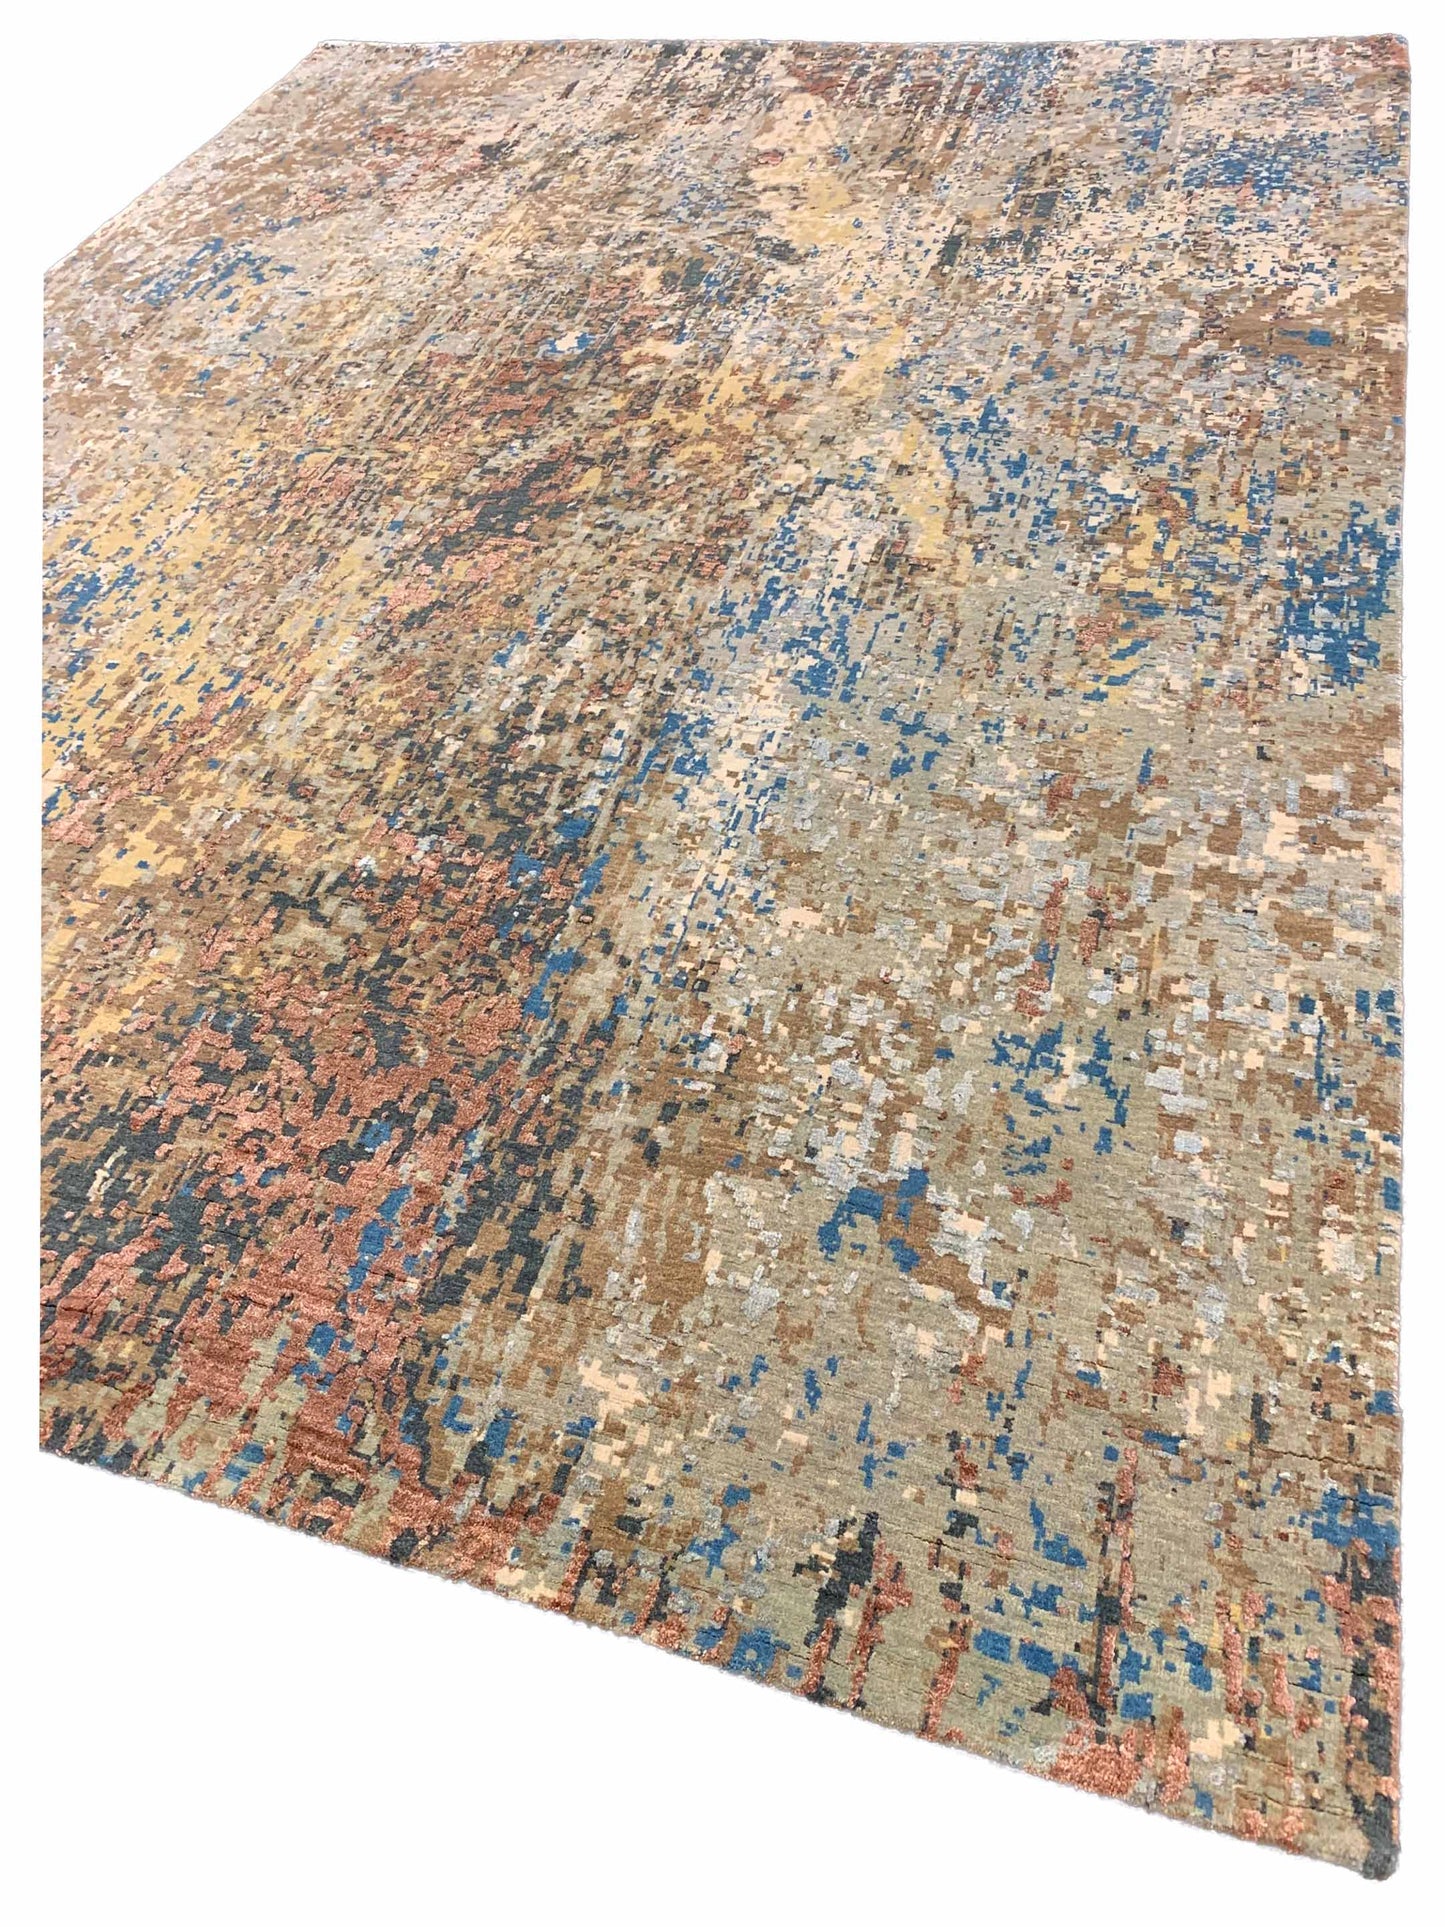 Artisan Mary  Multi  Contemporary Knotted Rug